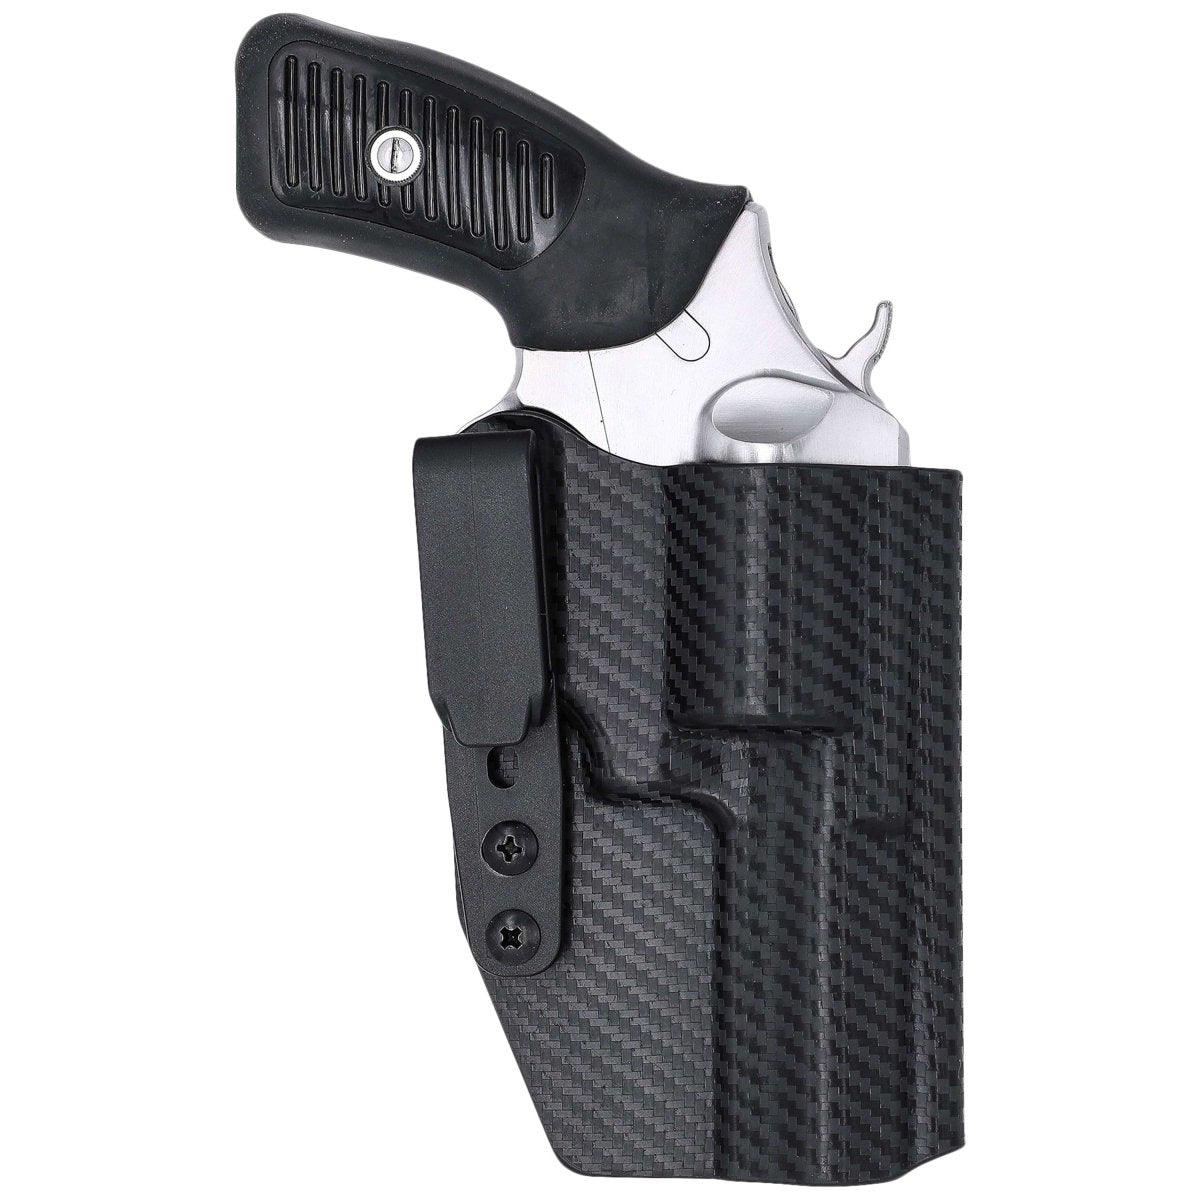 SP101 HOLSTERS